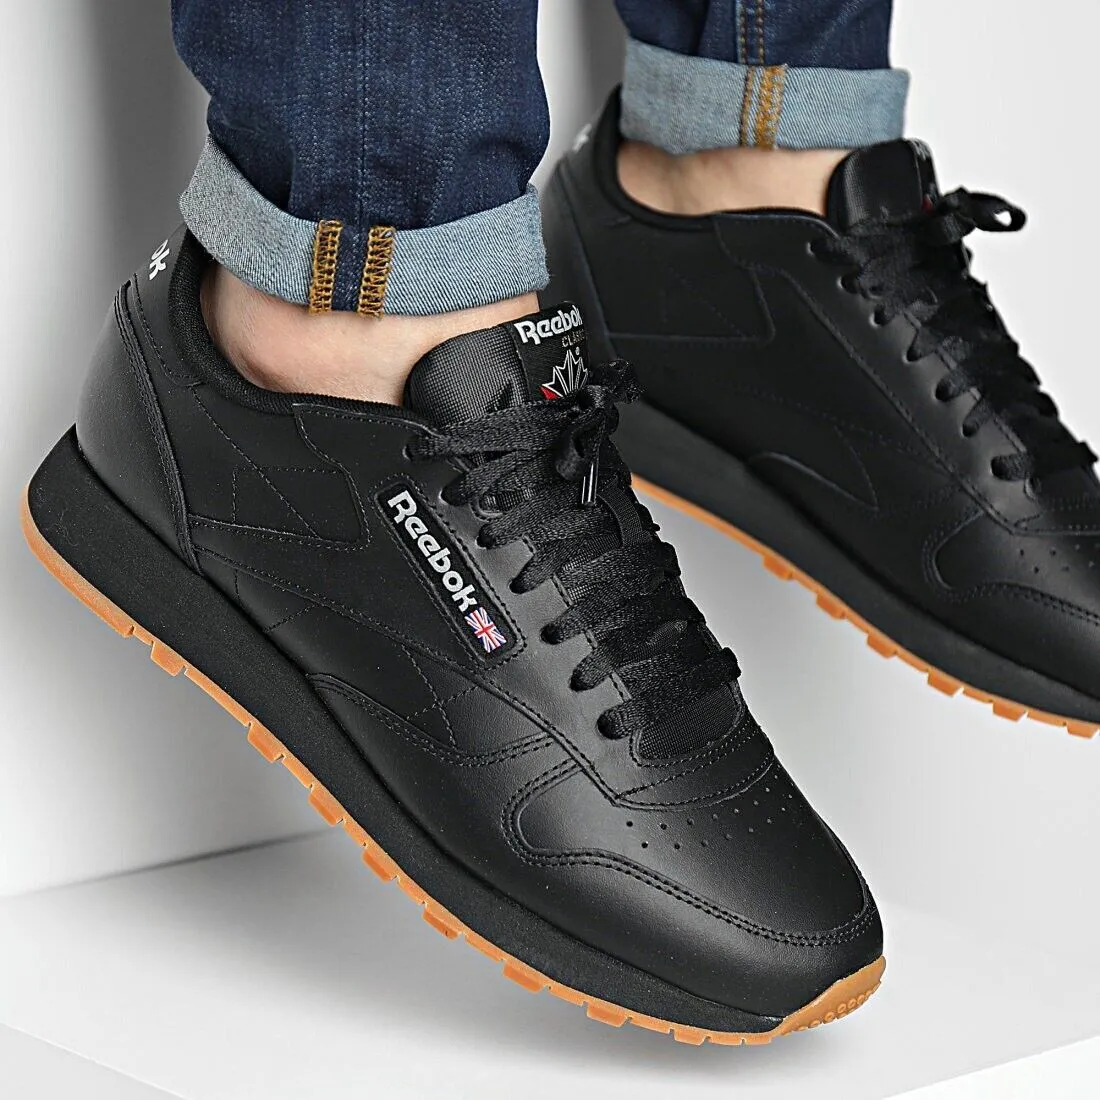 Reebok Classic Leather Black Gum Shoes Sneakers Sizes 8 - 13 | eBay